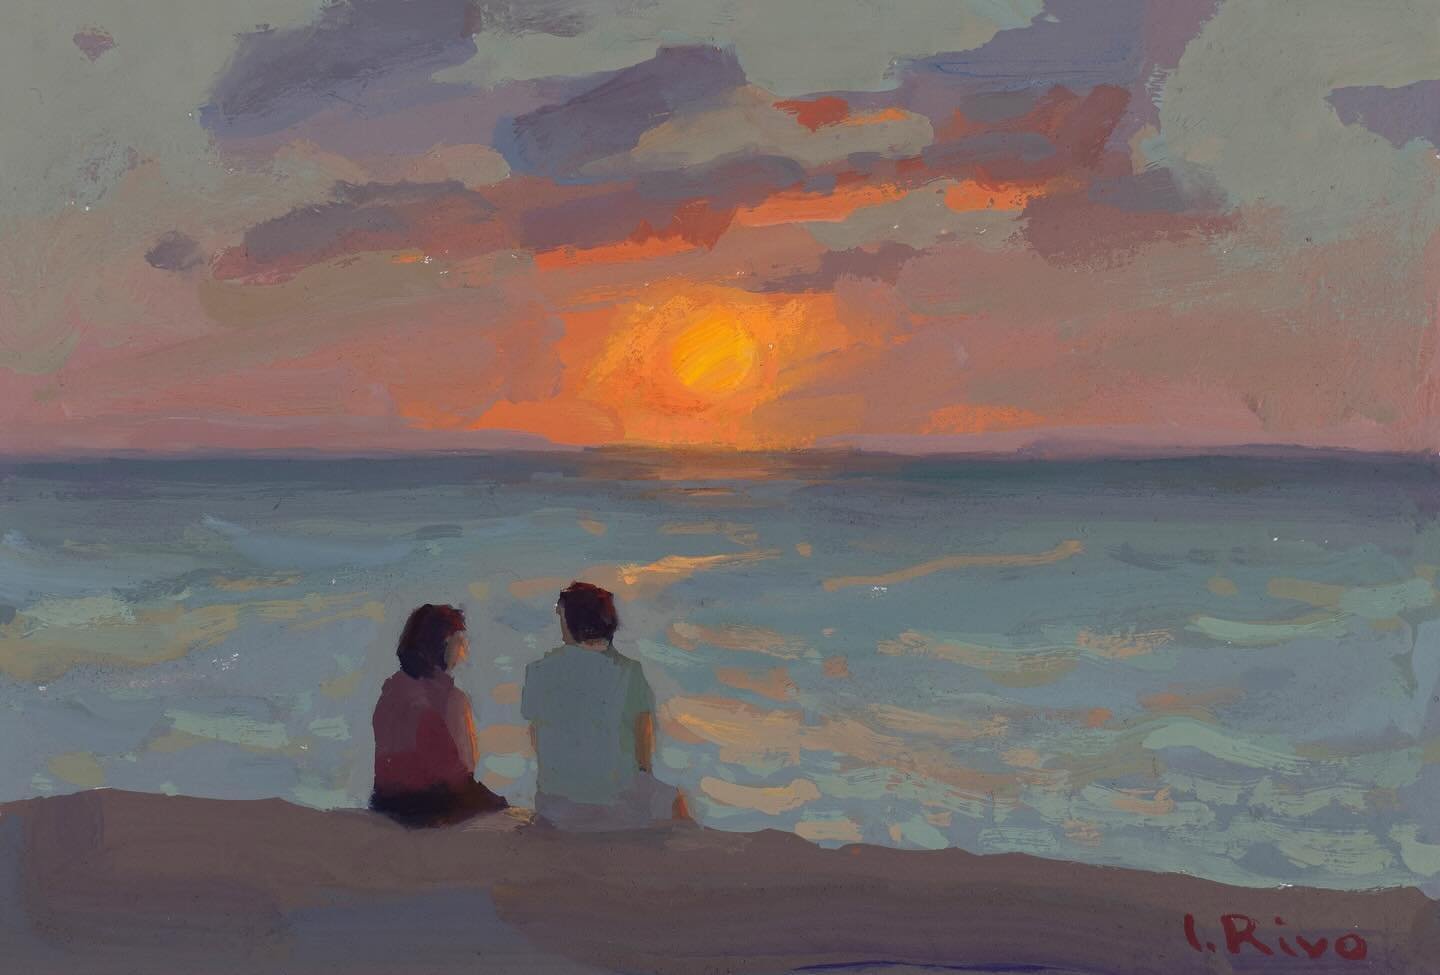 Sunset in Hawaii. This was a commission I really enjoyed working on. Gouache on paper. 5x7 in.
***
If you have questions about my color palette or other materials that I use in painting with gouache, please download my free 30-page pdf guide at the l